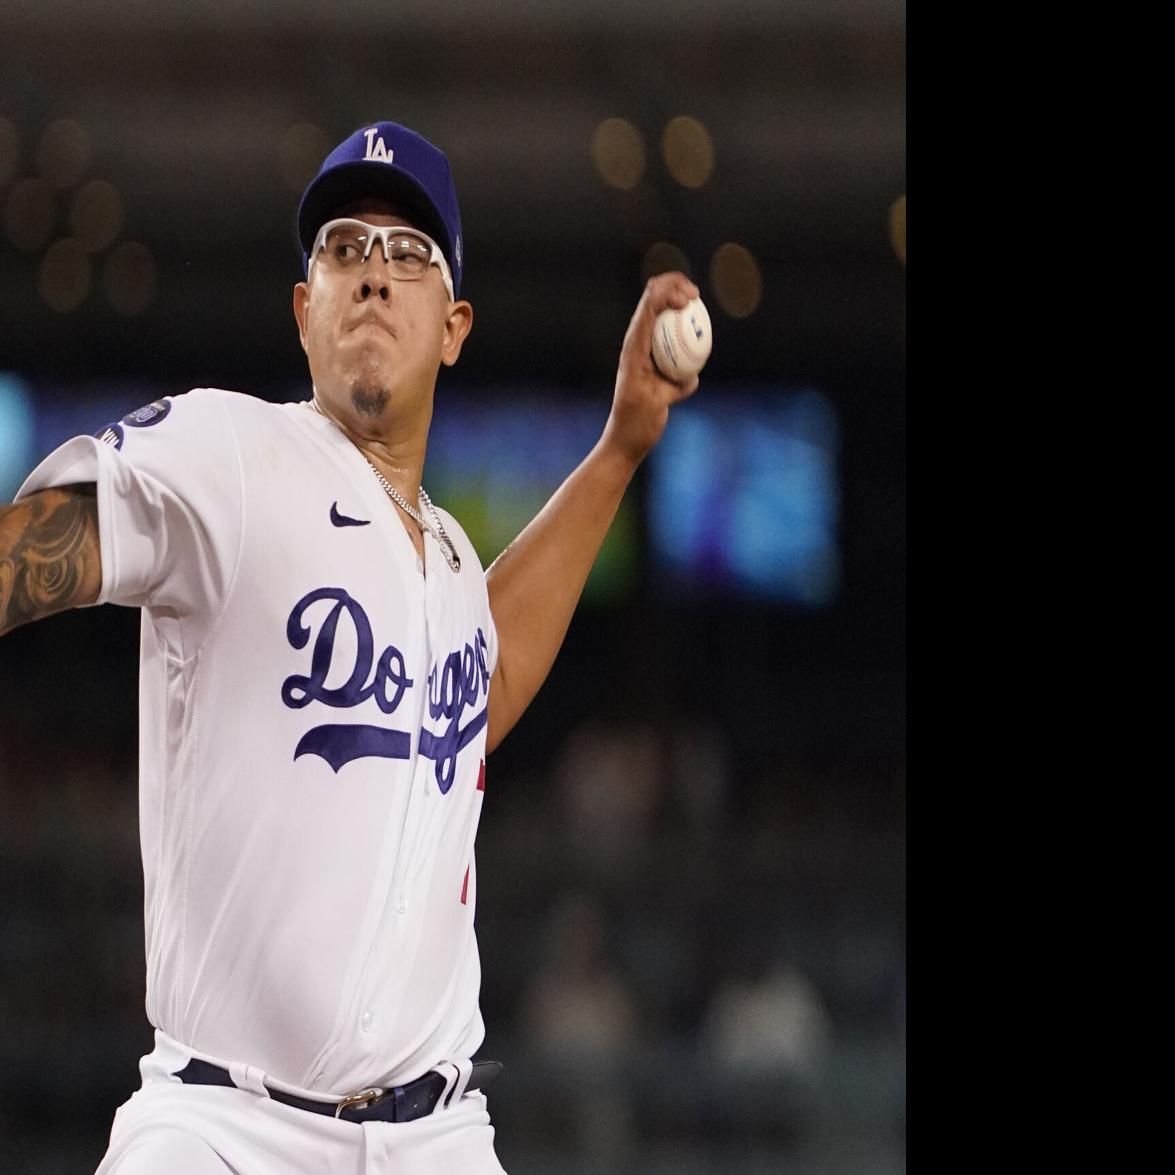 Julio Urías earns his first opening day start for Dodgers - Los